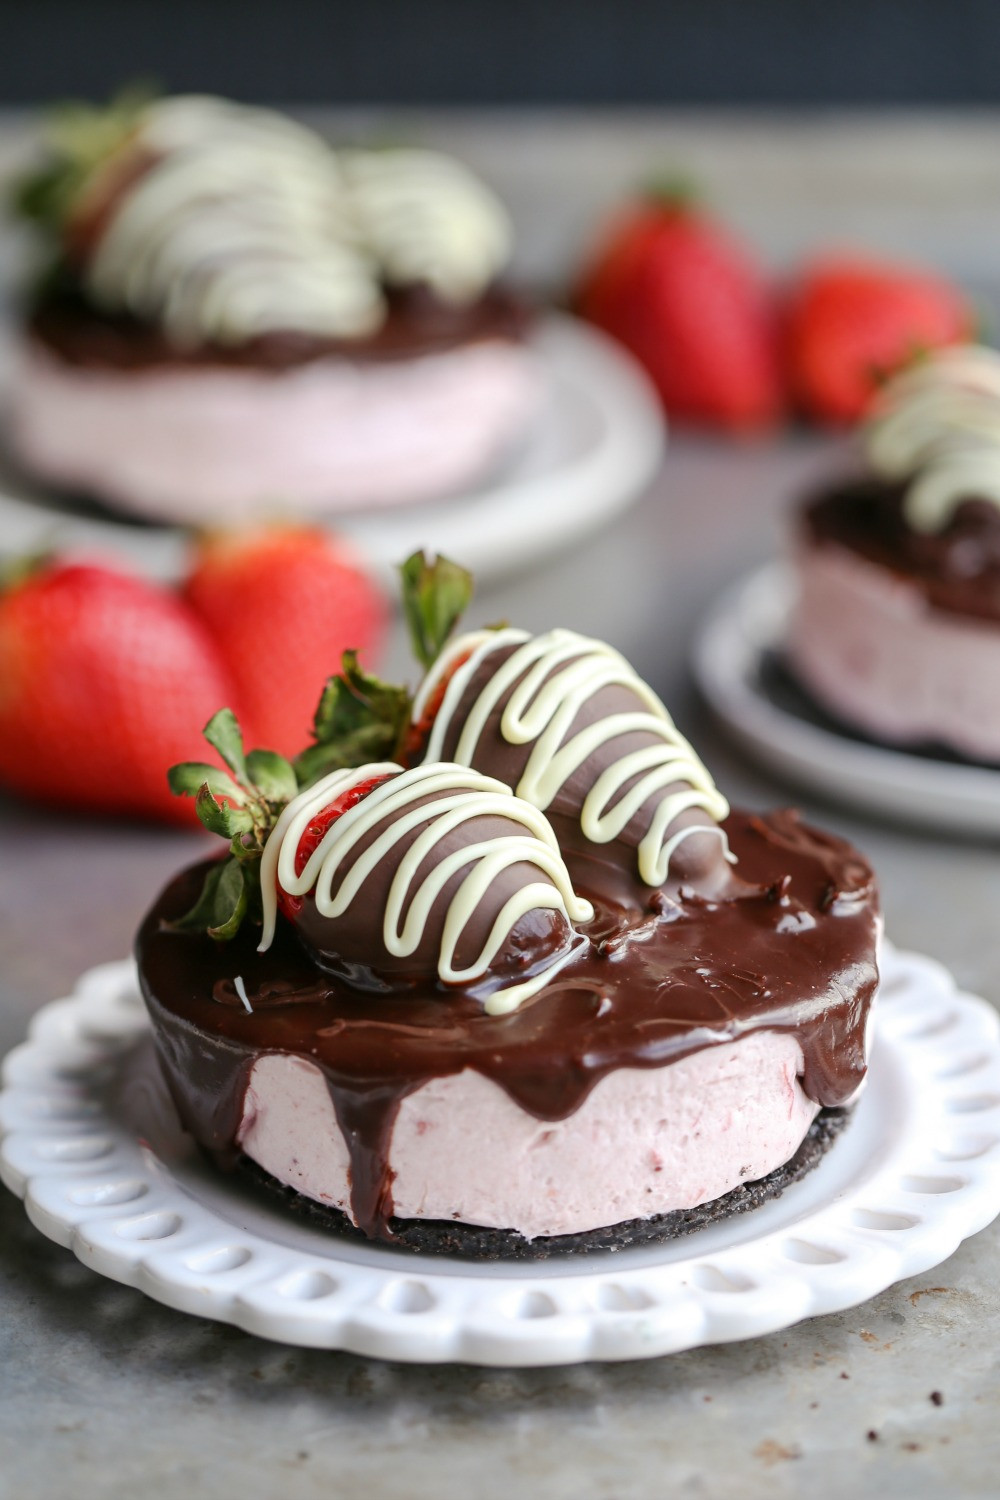 Fancy Dessert Recipes
 19 Easy Chocolate Covered Strawberries Recipes – Ideas for